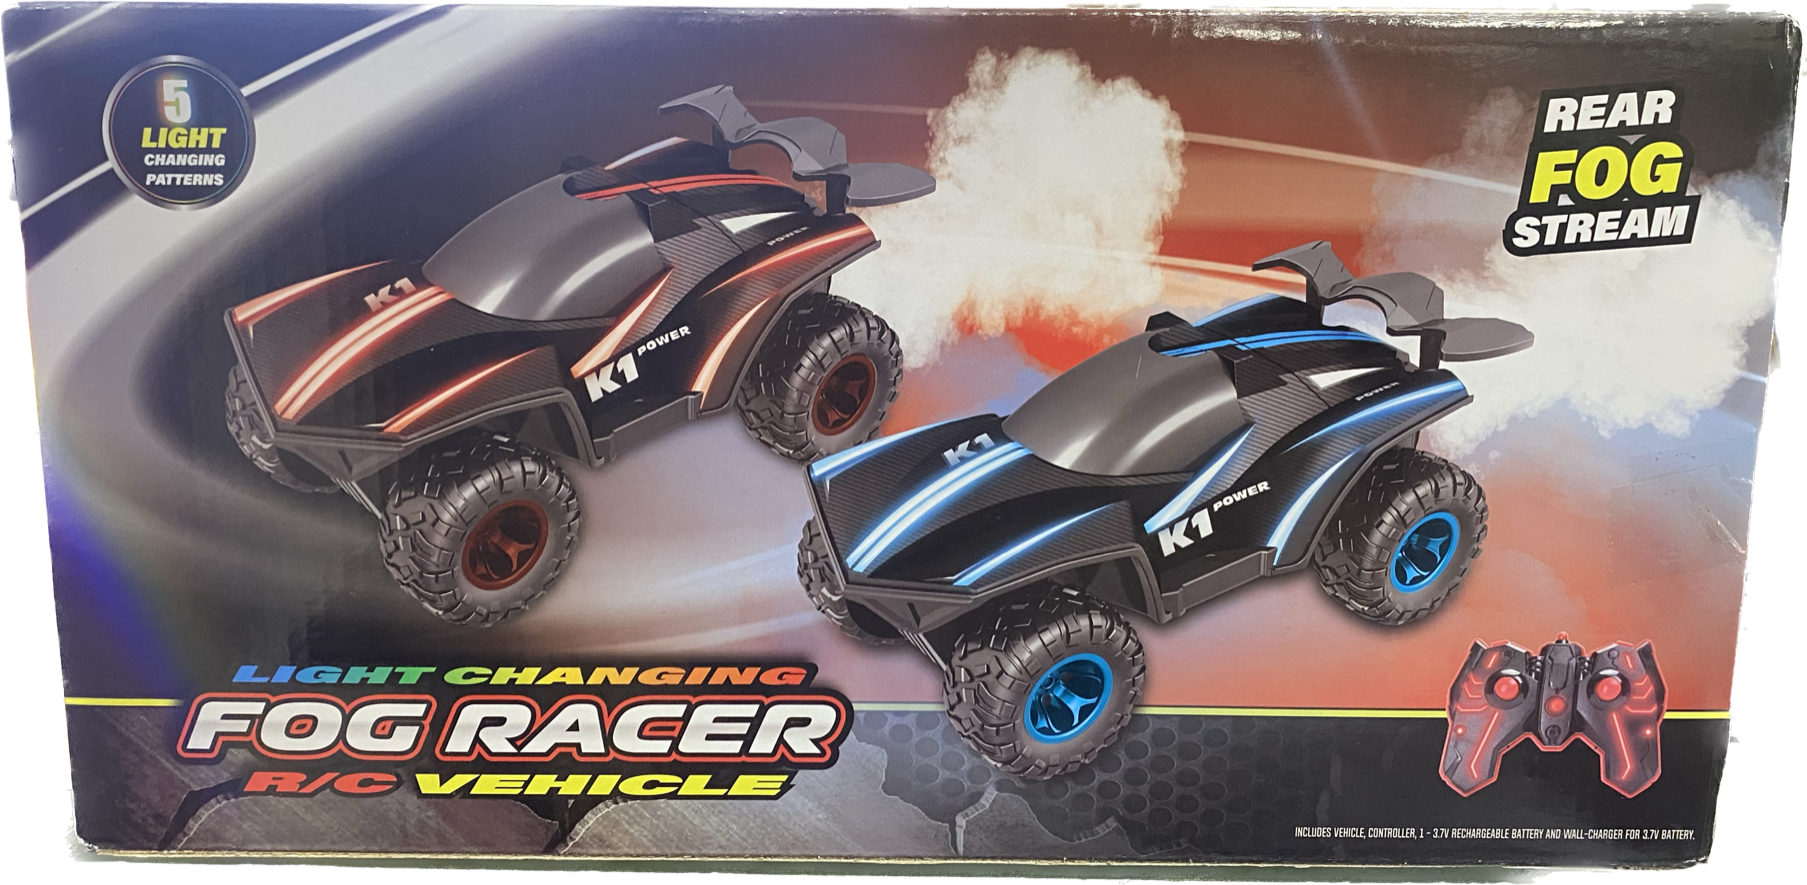 Kid Galaxy Light Changing Fog Racer Remote Control Vehicle